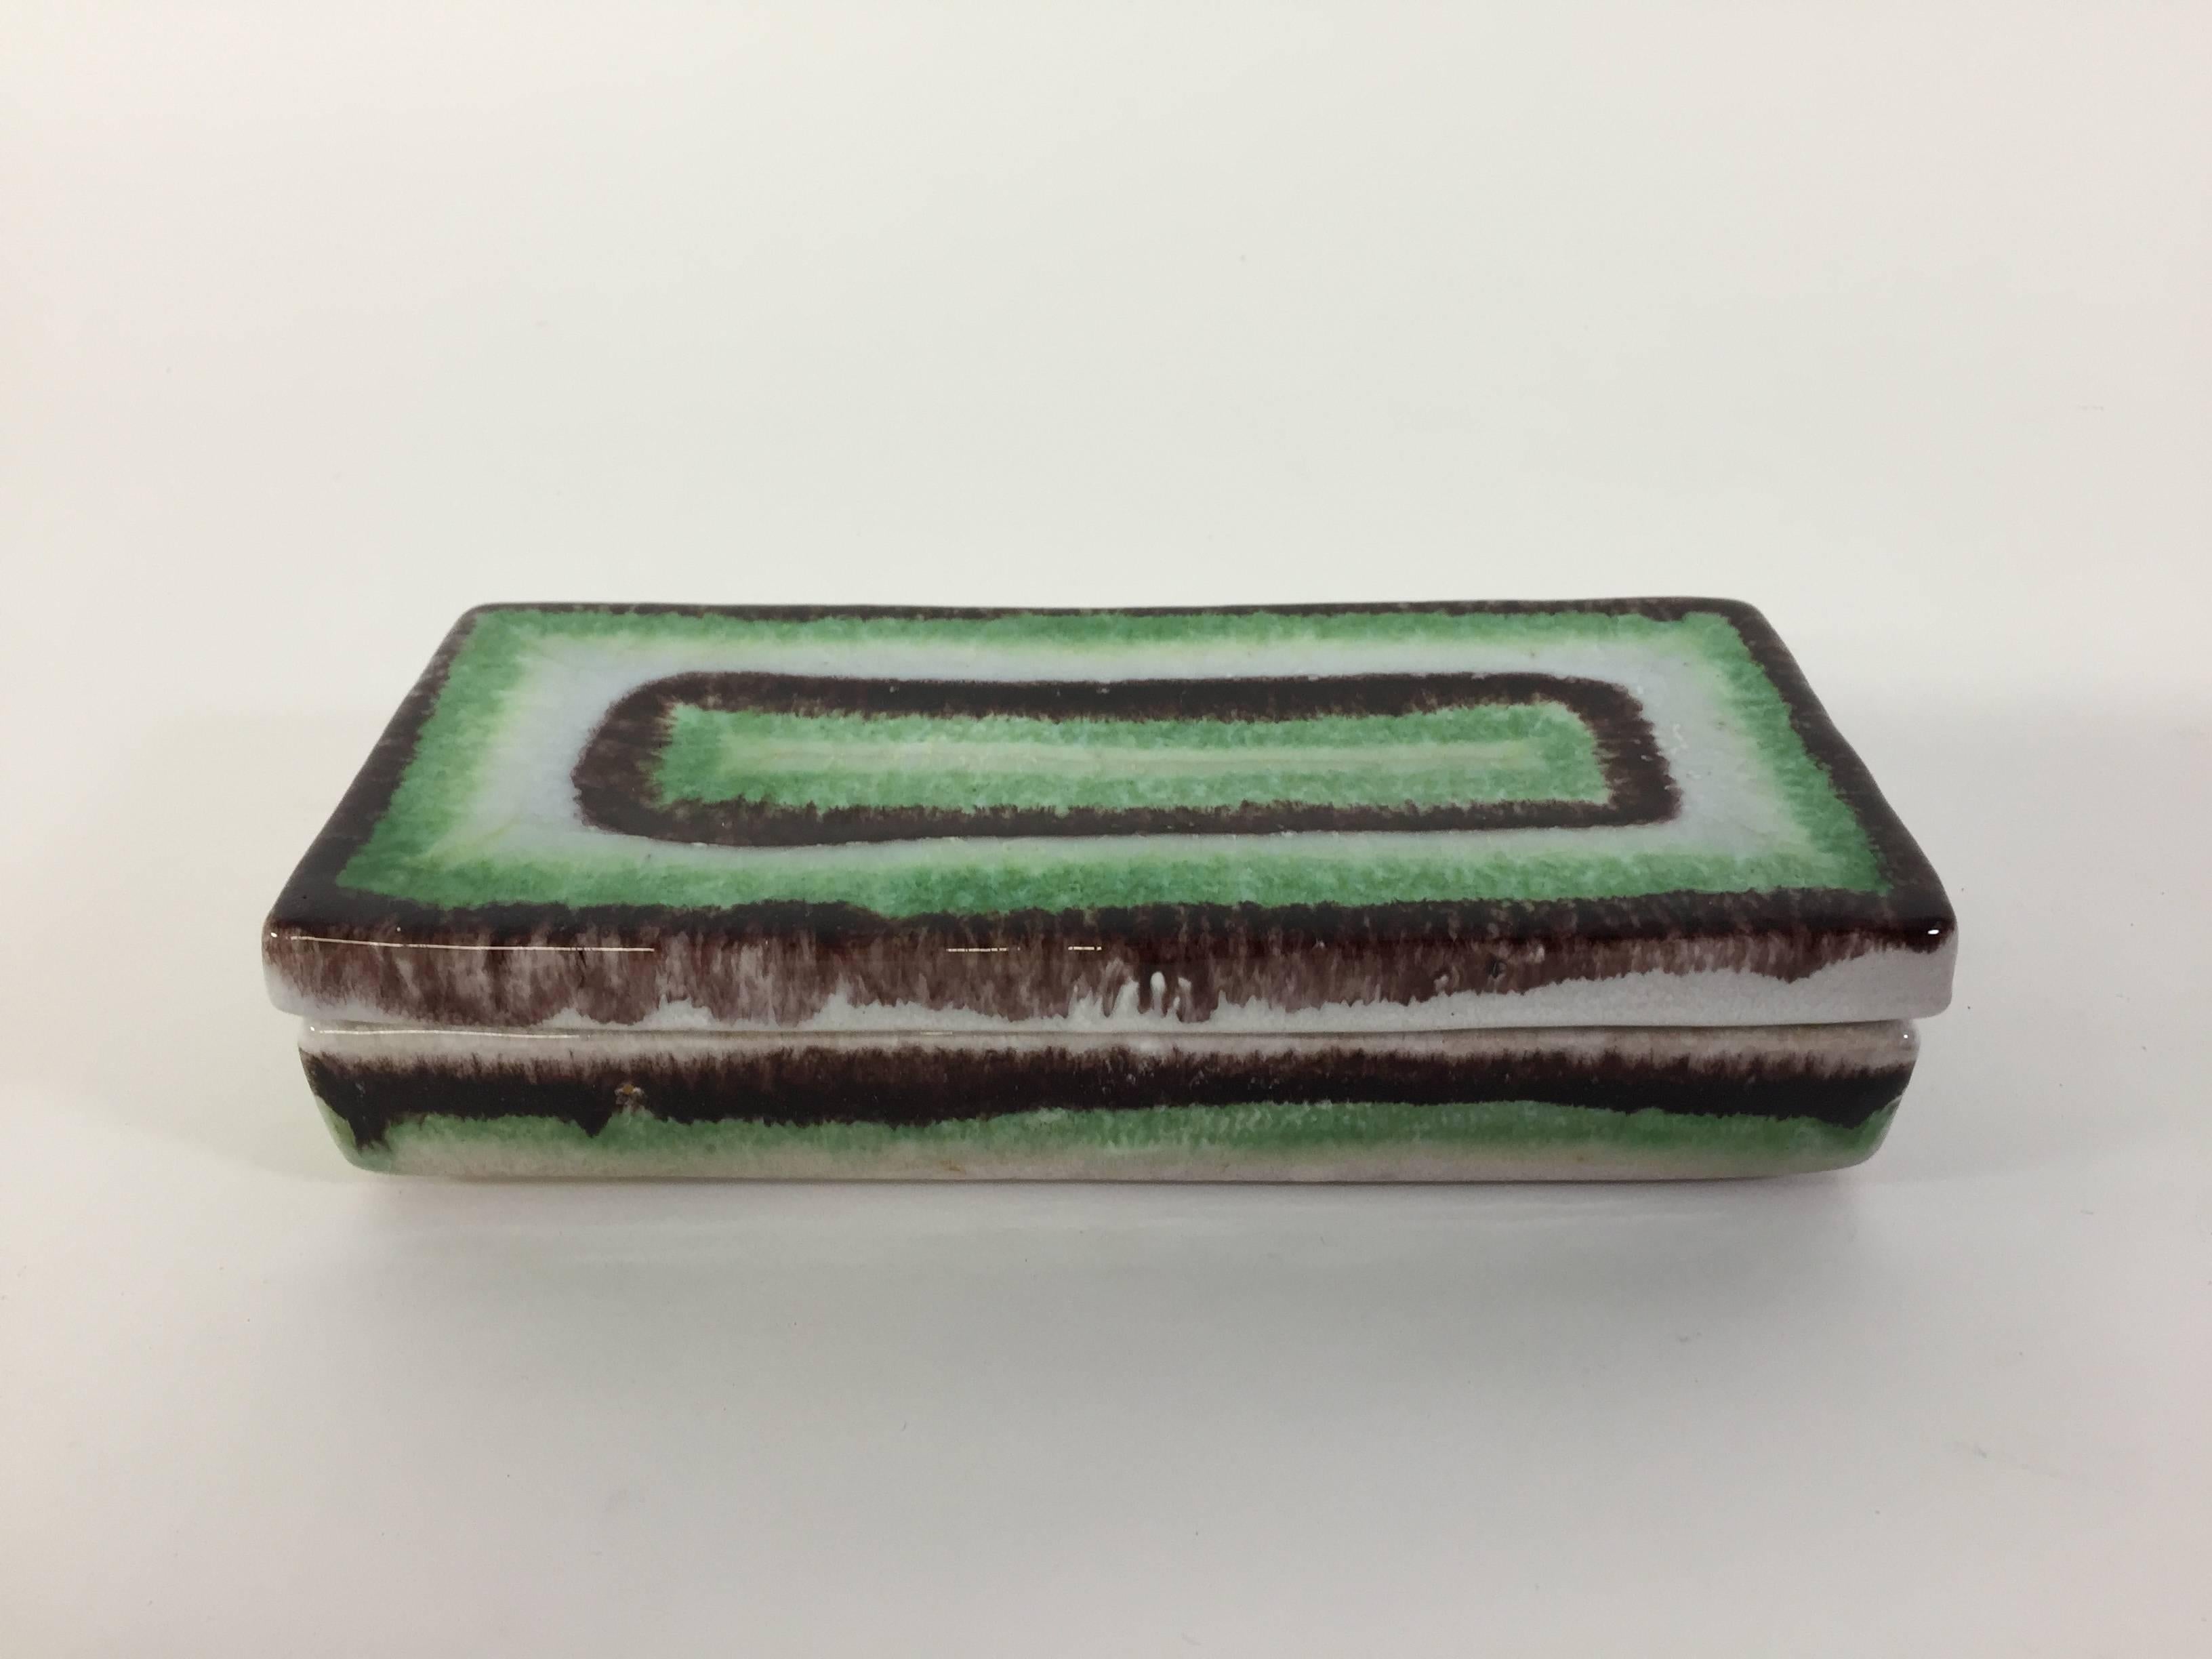 Fully signed art pottery box for desk or tabletop. Beautifully decorated with a minty green, white and aubergine glazes, circa 1950-1960. Bellini mark on Raymor label.